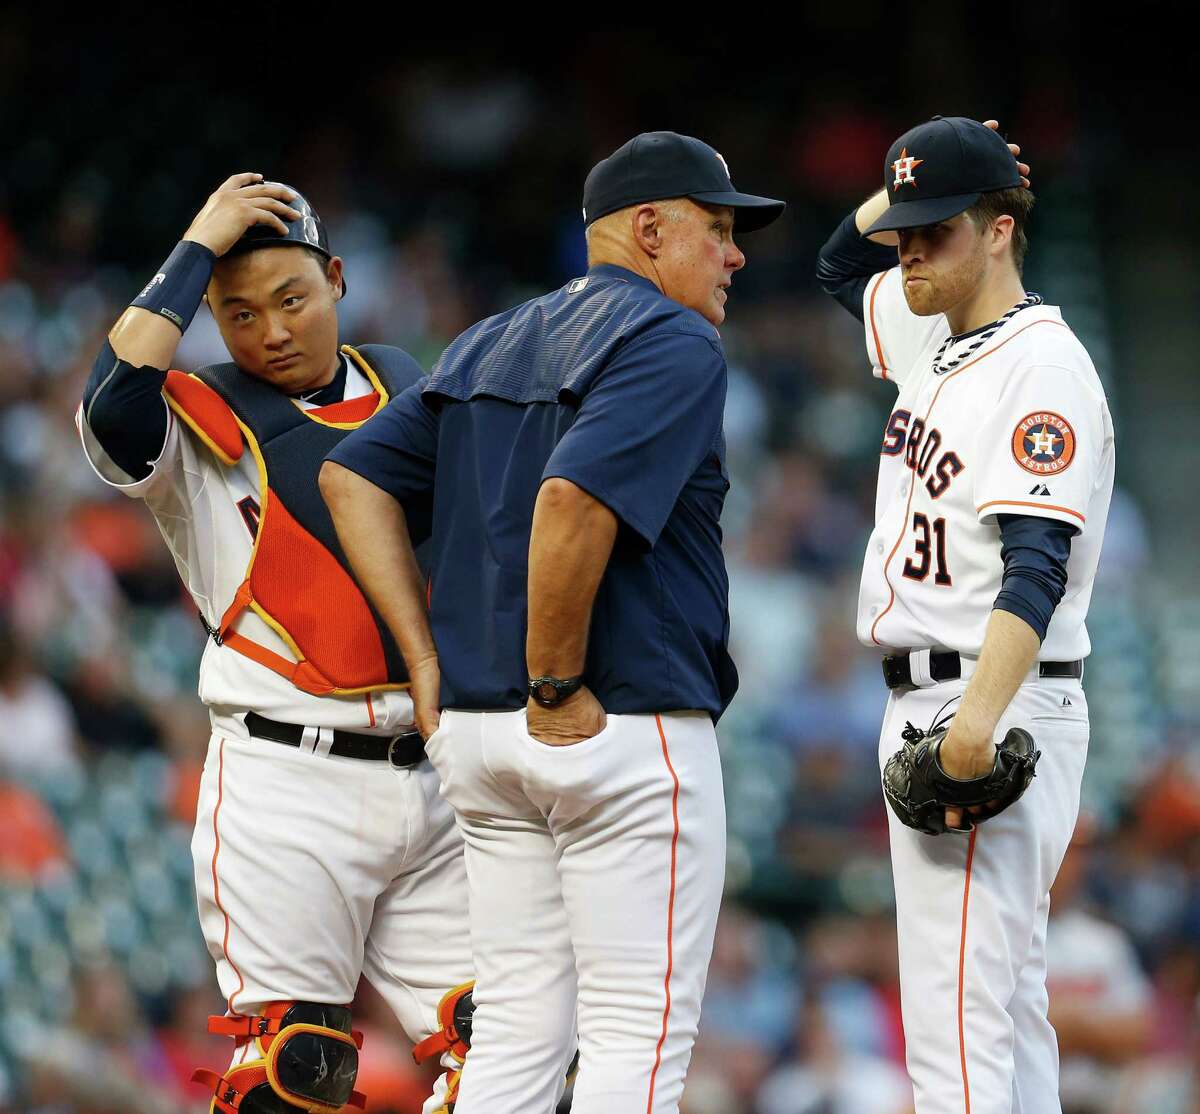 Resurgence of Evan Gattis gives the Astros one less thing to worry